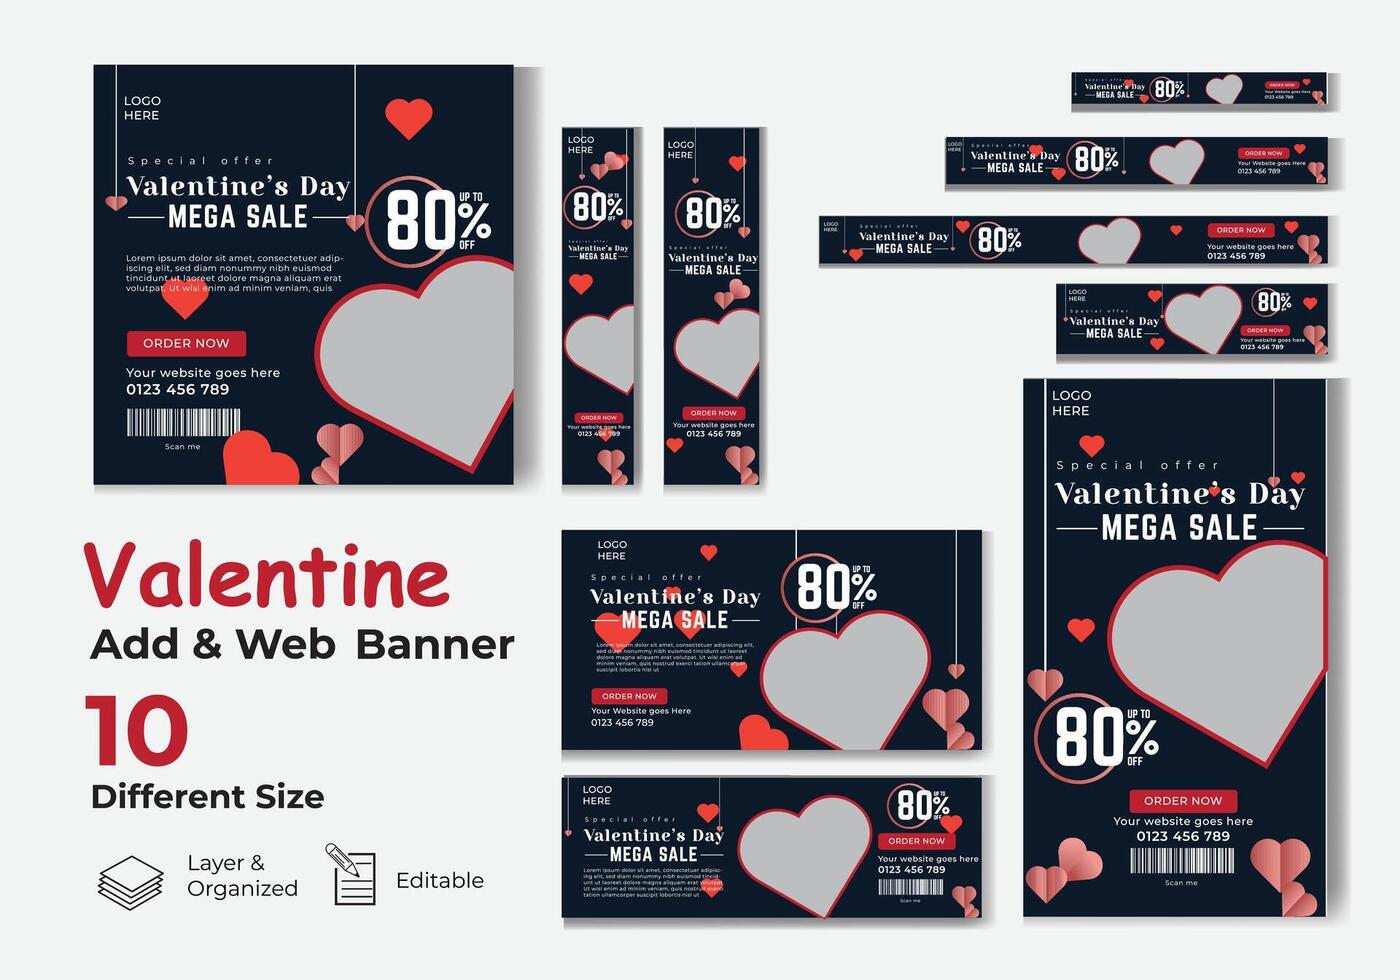 Valentines day business web banner template. Web promotion banner in different size vector